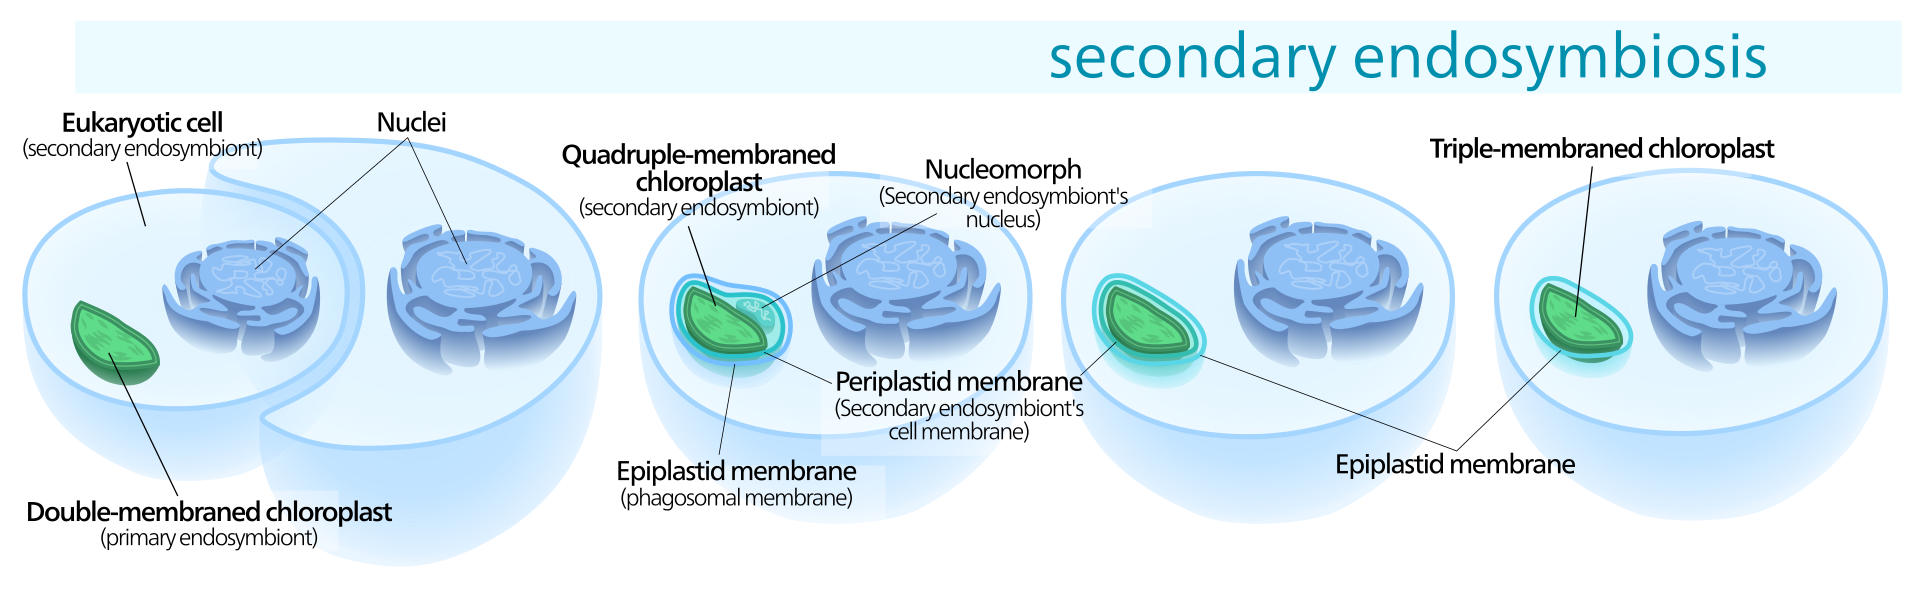 A cell with a chloroplast and nucleus is engulfed by another eukaryotic cell, becoming a chloroplast with 3 membranes.